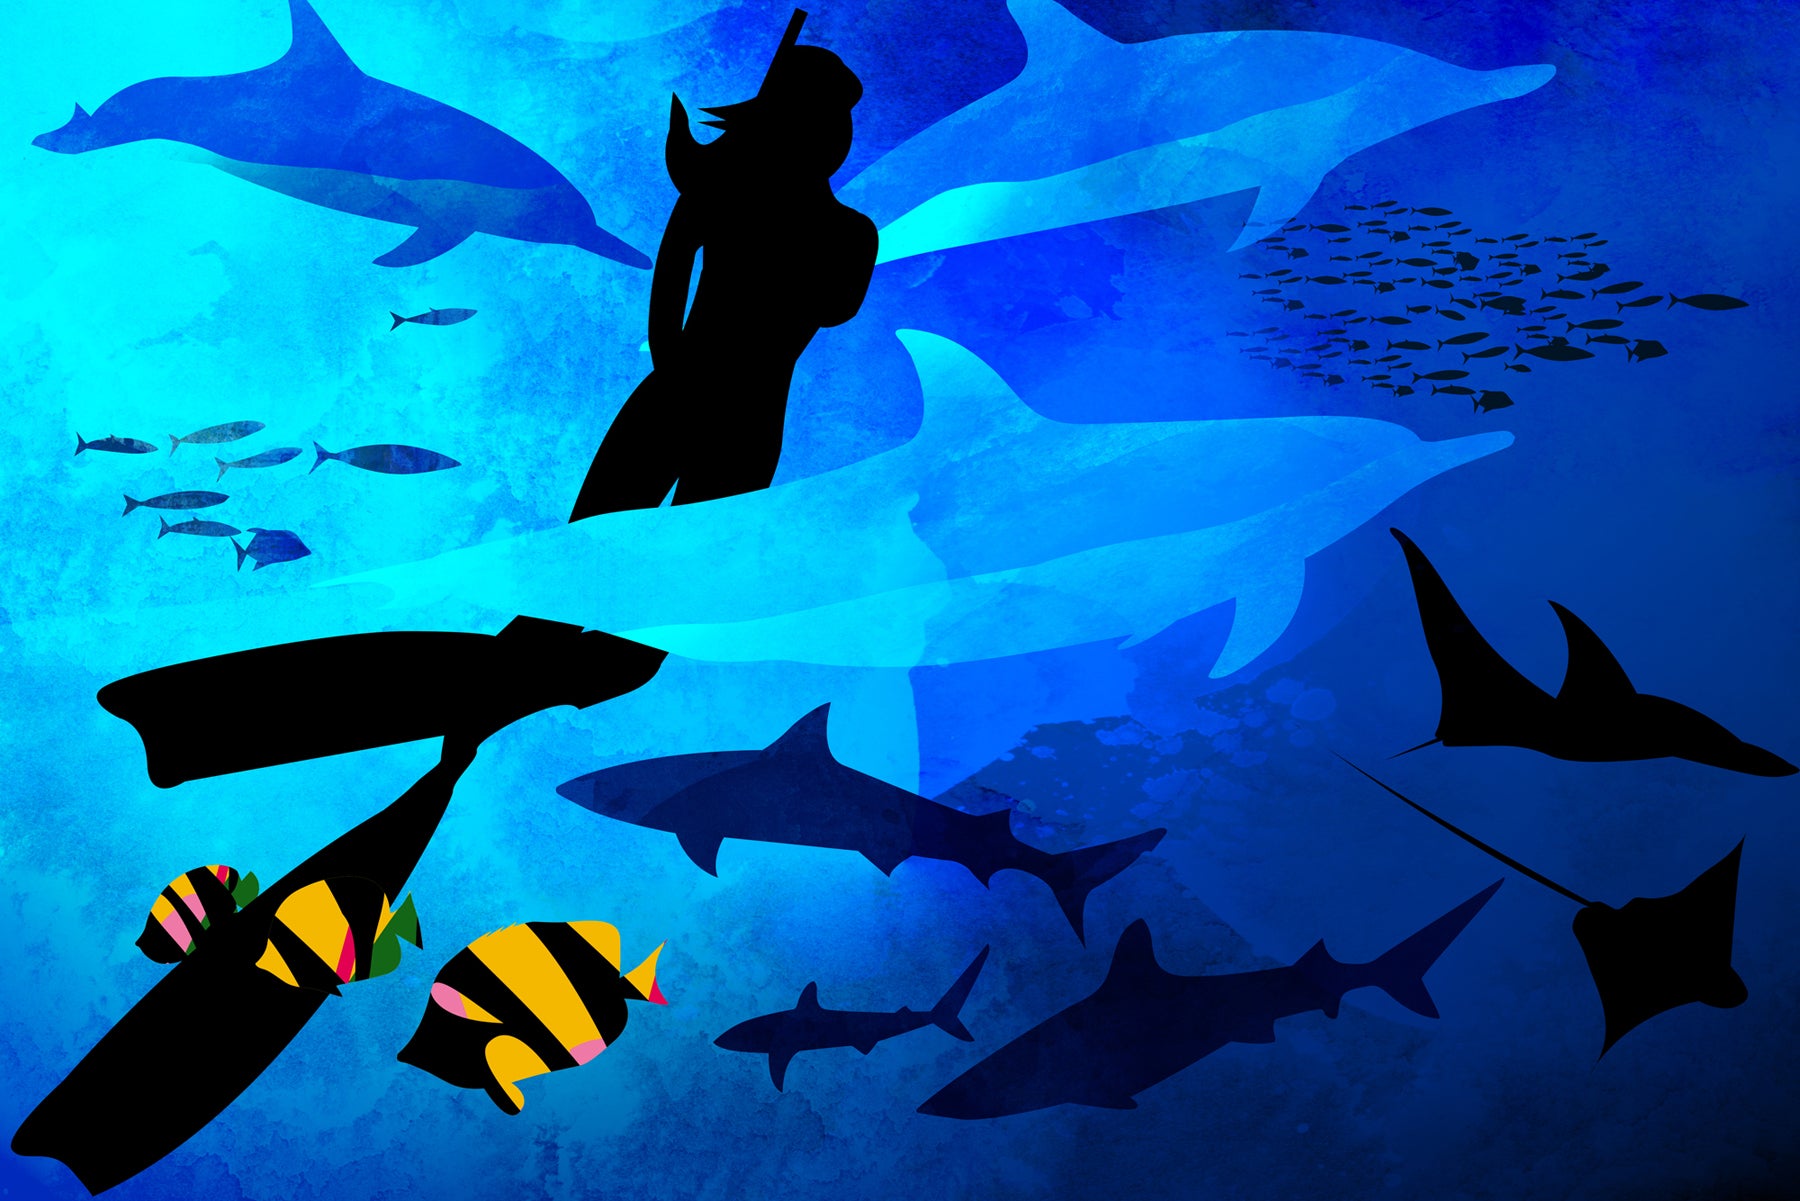 Illustrated image of Natalie Parra, founder of Keiko Conservation, scuba-diving in bright blue water, surrounded by marine life.